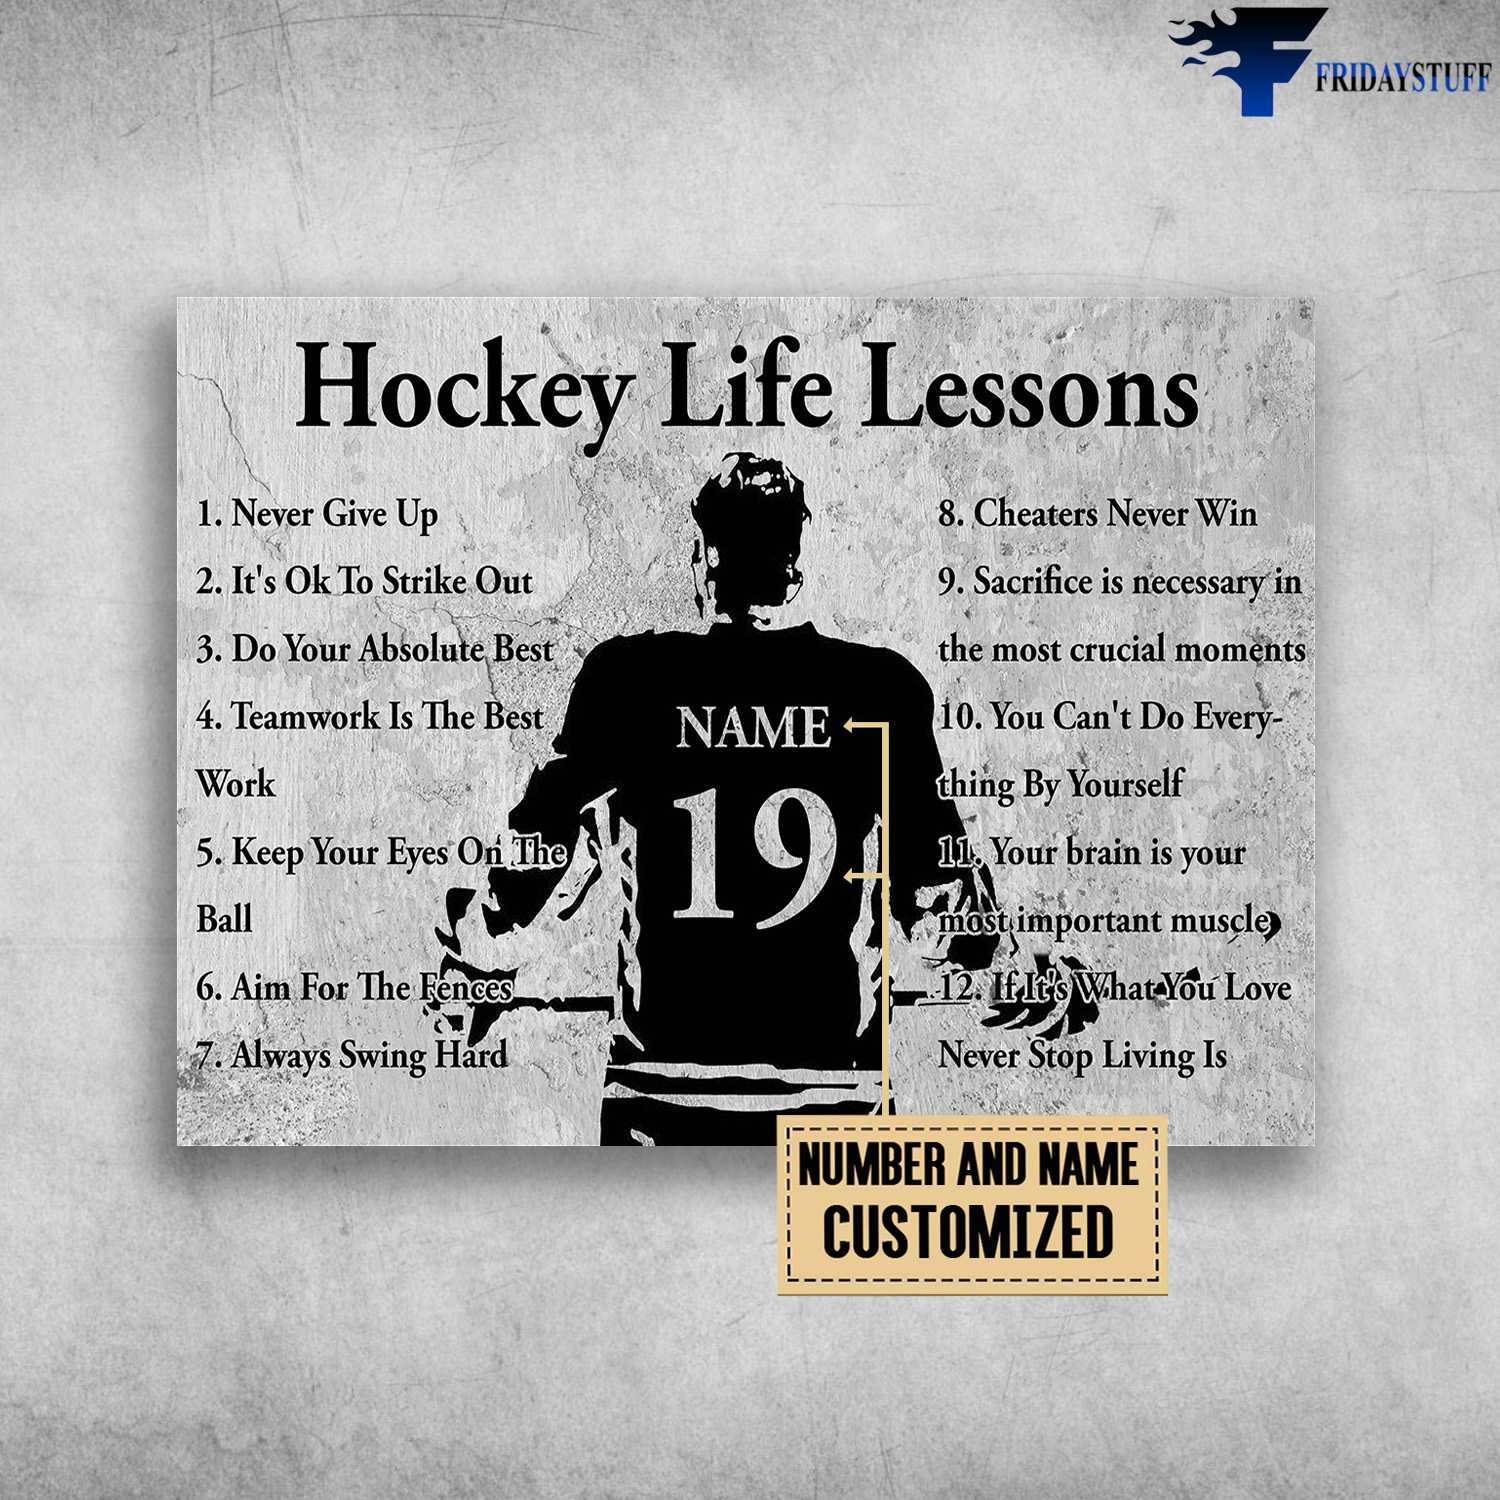 Hockey Player, Hockey Lover, Hockey Life Lessons, Never Give Up, It's Ok To Stricke Out, Do Your Absolute Best, Teamwork Is The Best Work, Keep Your Eyes On The Ball, Aim For The Fences, Always Swing Hand